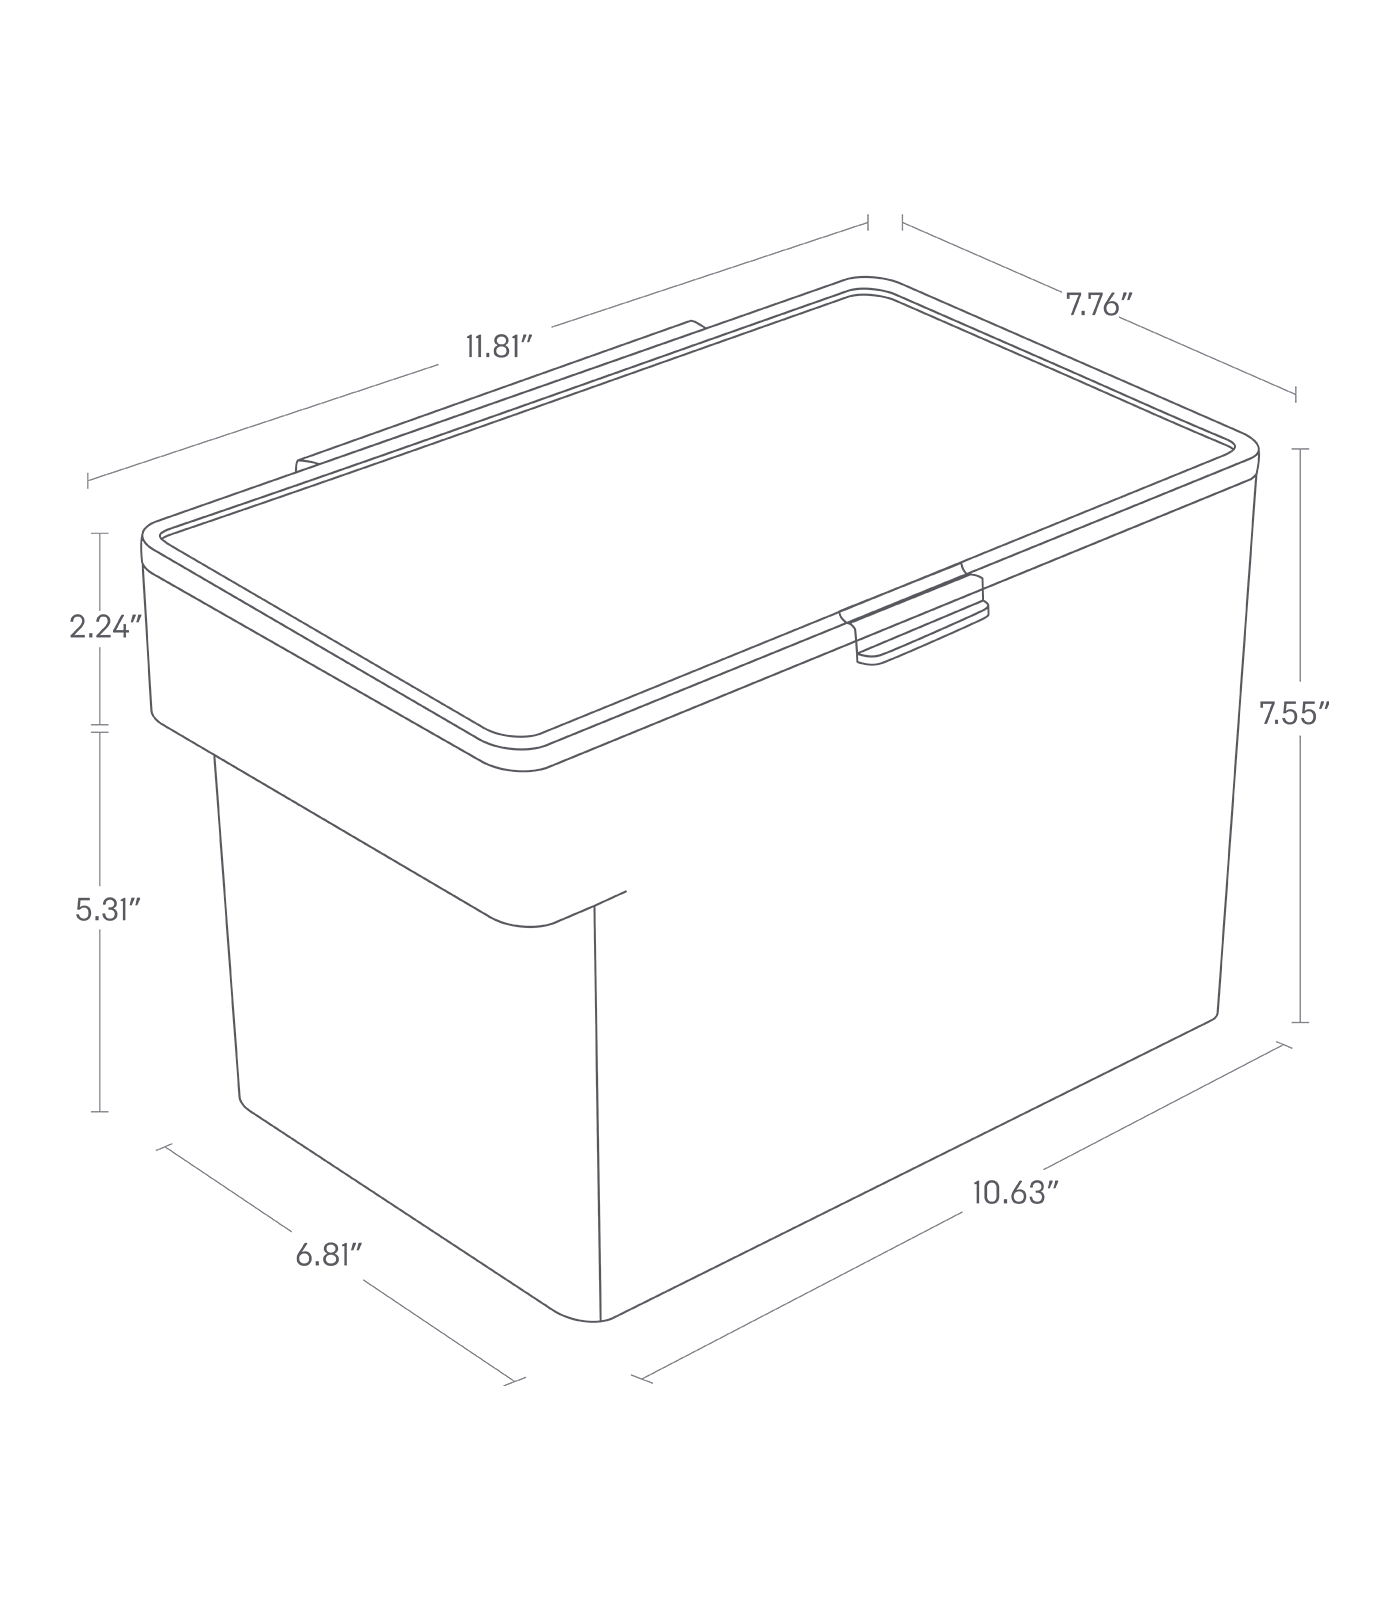 Dimension image for Airtight Pet Food Container - Three Sizes on a white background including dimensions  L 7.76 x W 11.81 x H 7.56 inches